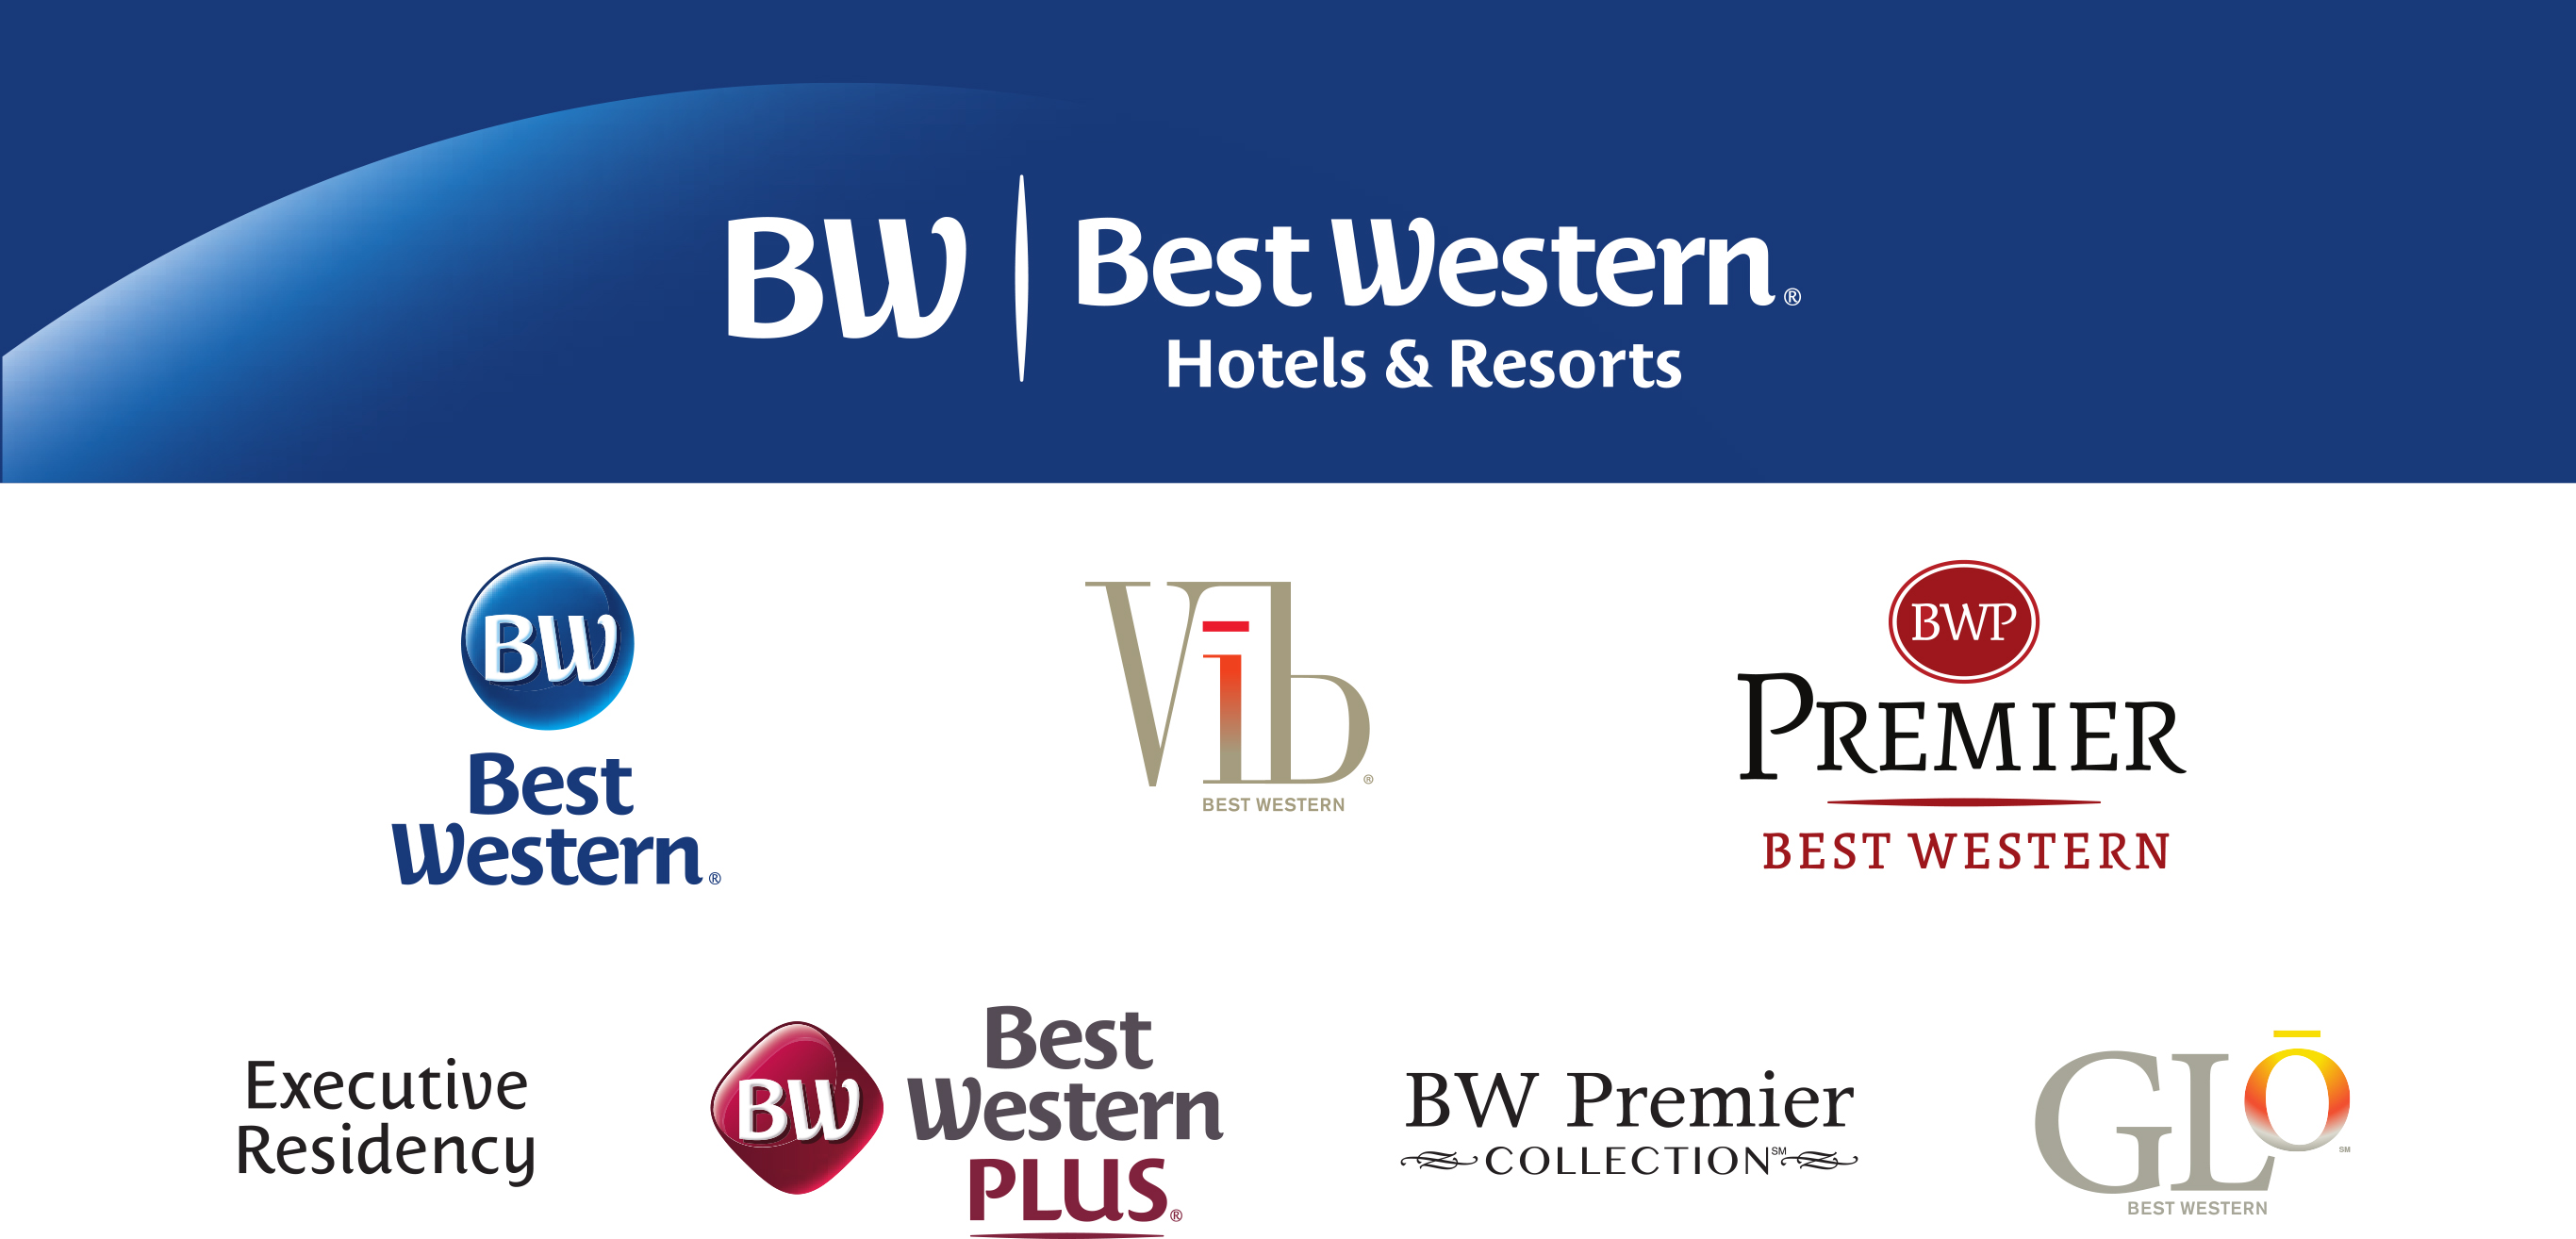 Here are the logos for all seven brands of Best Western — including the new Glo brand. Click on the graphic for a larger view of the logos. Source: Best Western Hotels & Resorts.